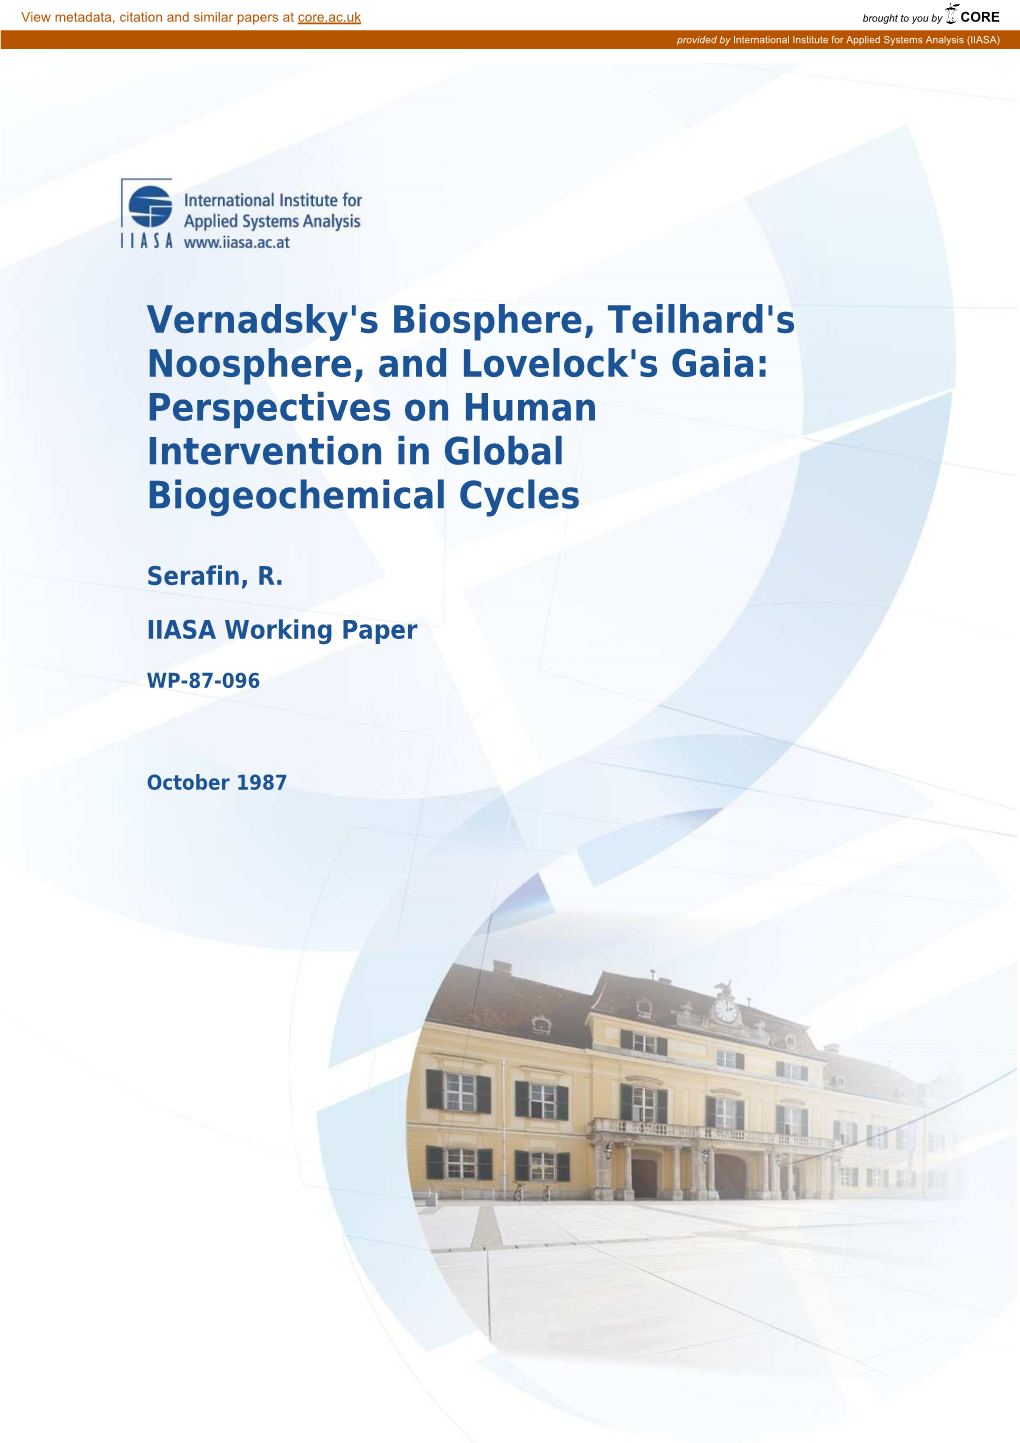 Vernadsky's Biosphere, Teilhard's Noosphere, and Lovelock's Gaia: Perspectives on Human Intervention in Global Biogeochemical Cycles